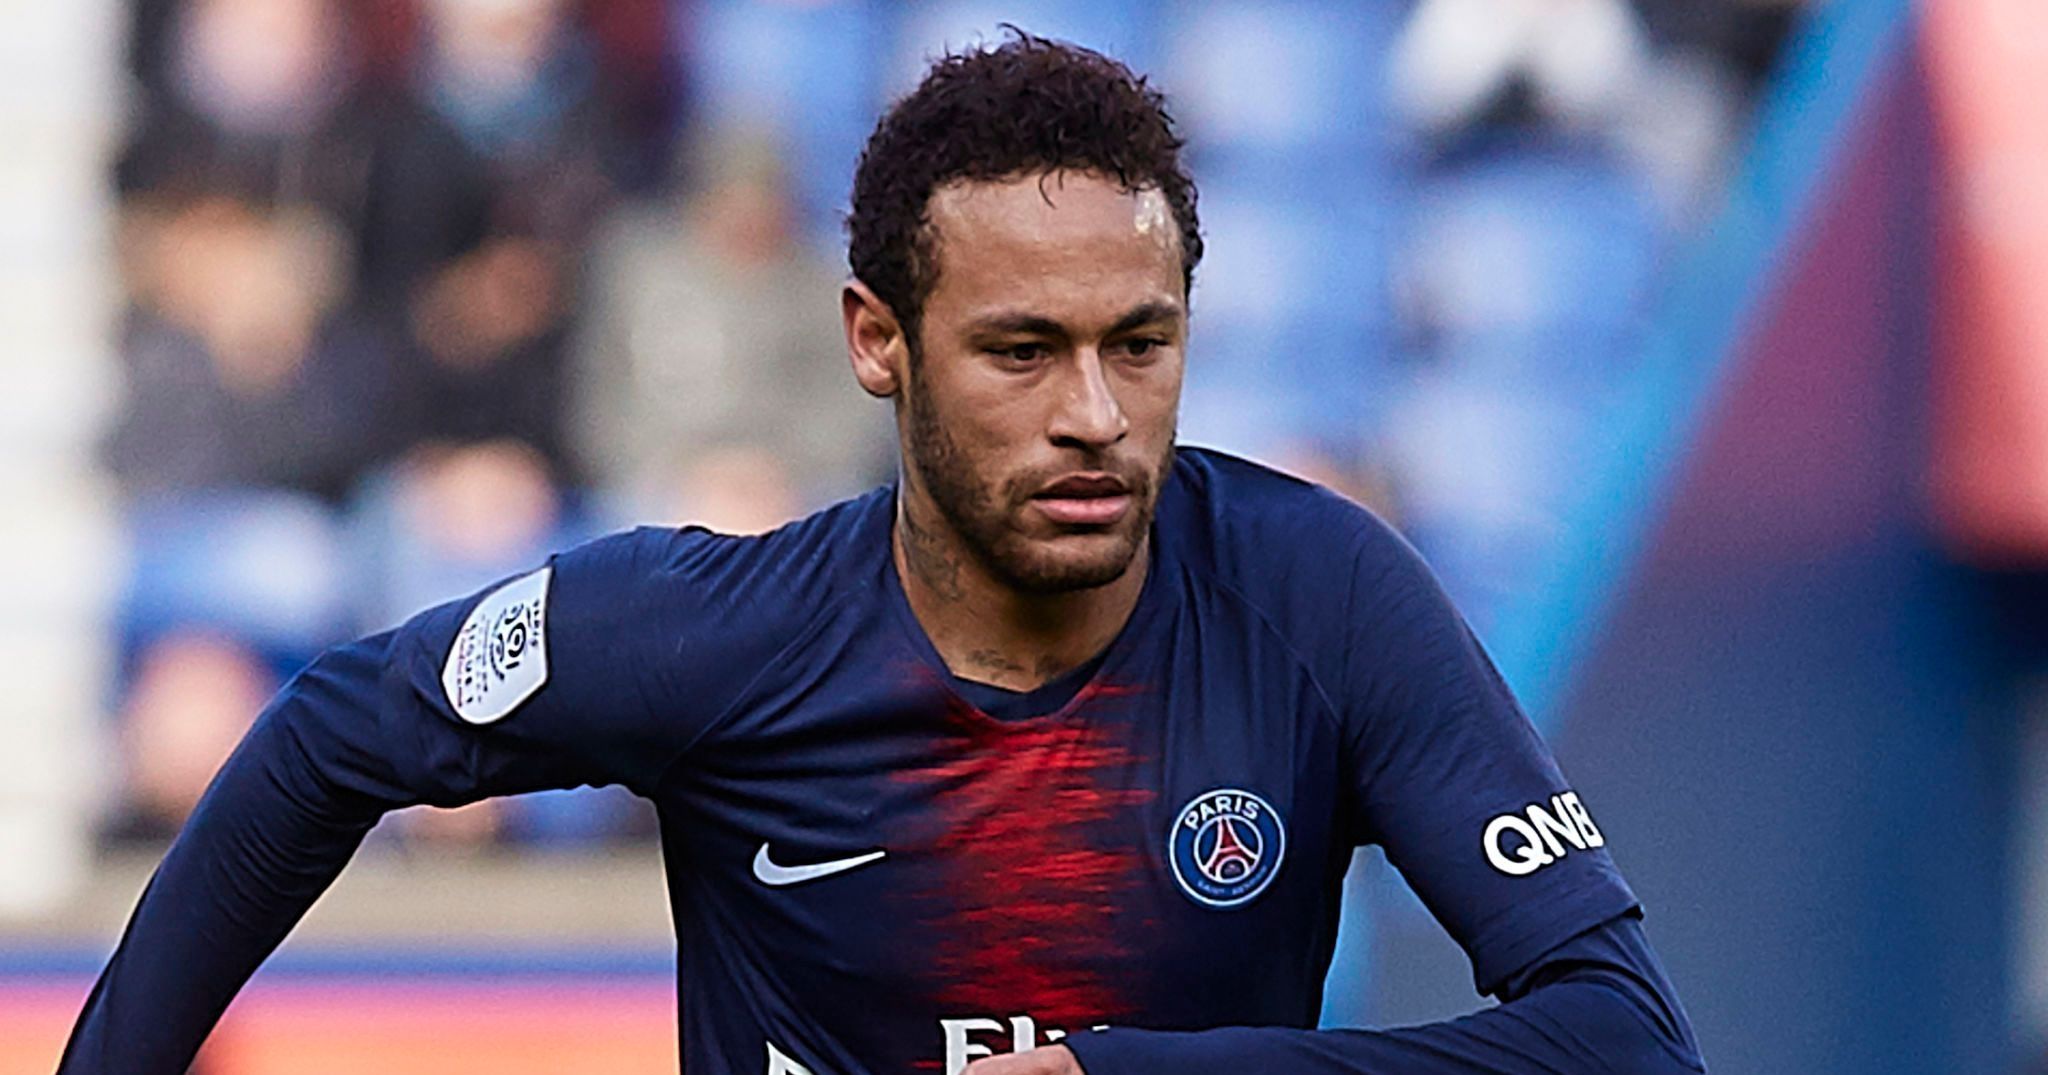 It Appears That Neymar Has Informed PSG That He Wishes To Leave. Is He